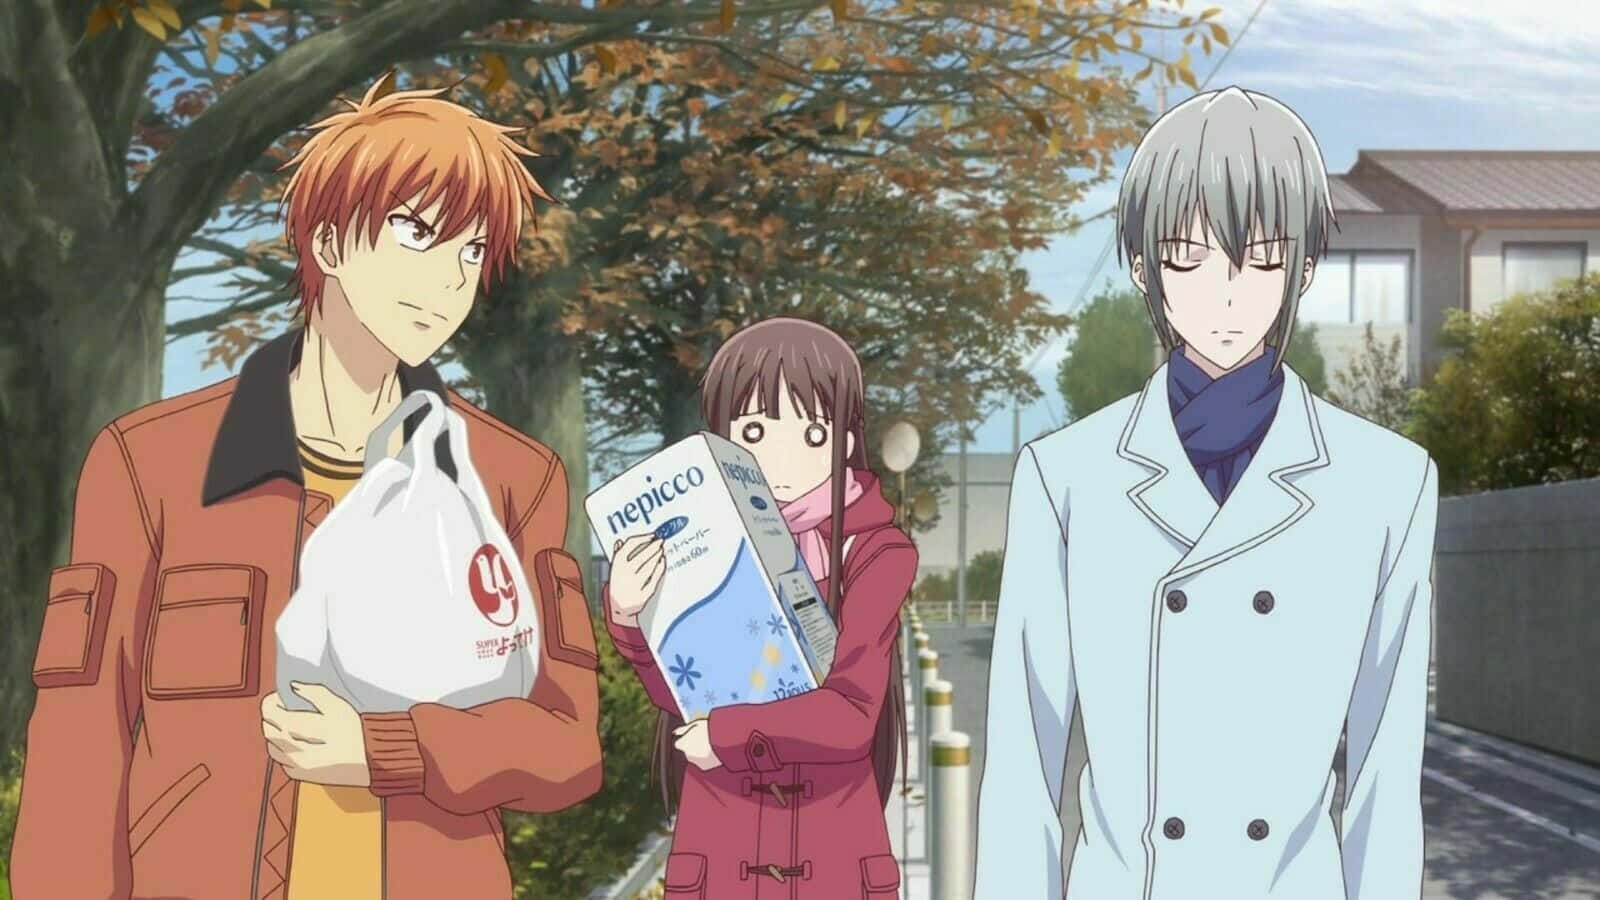 A collection of colorful fruits in Fruits Basket